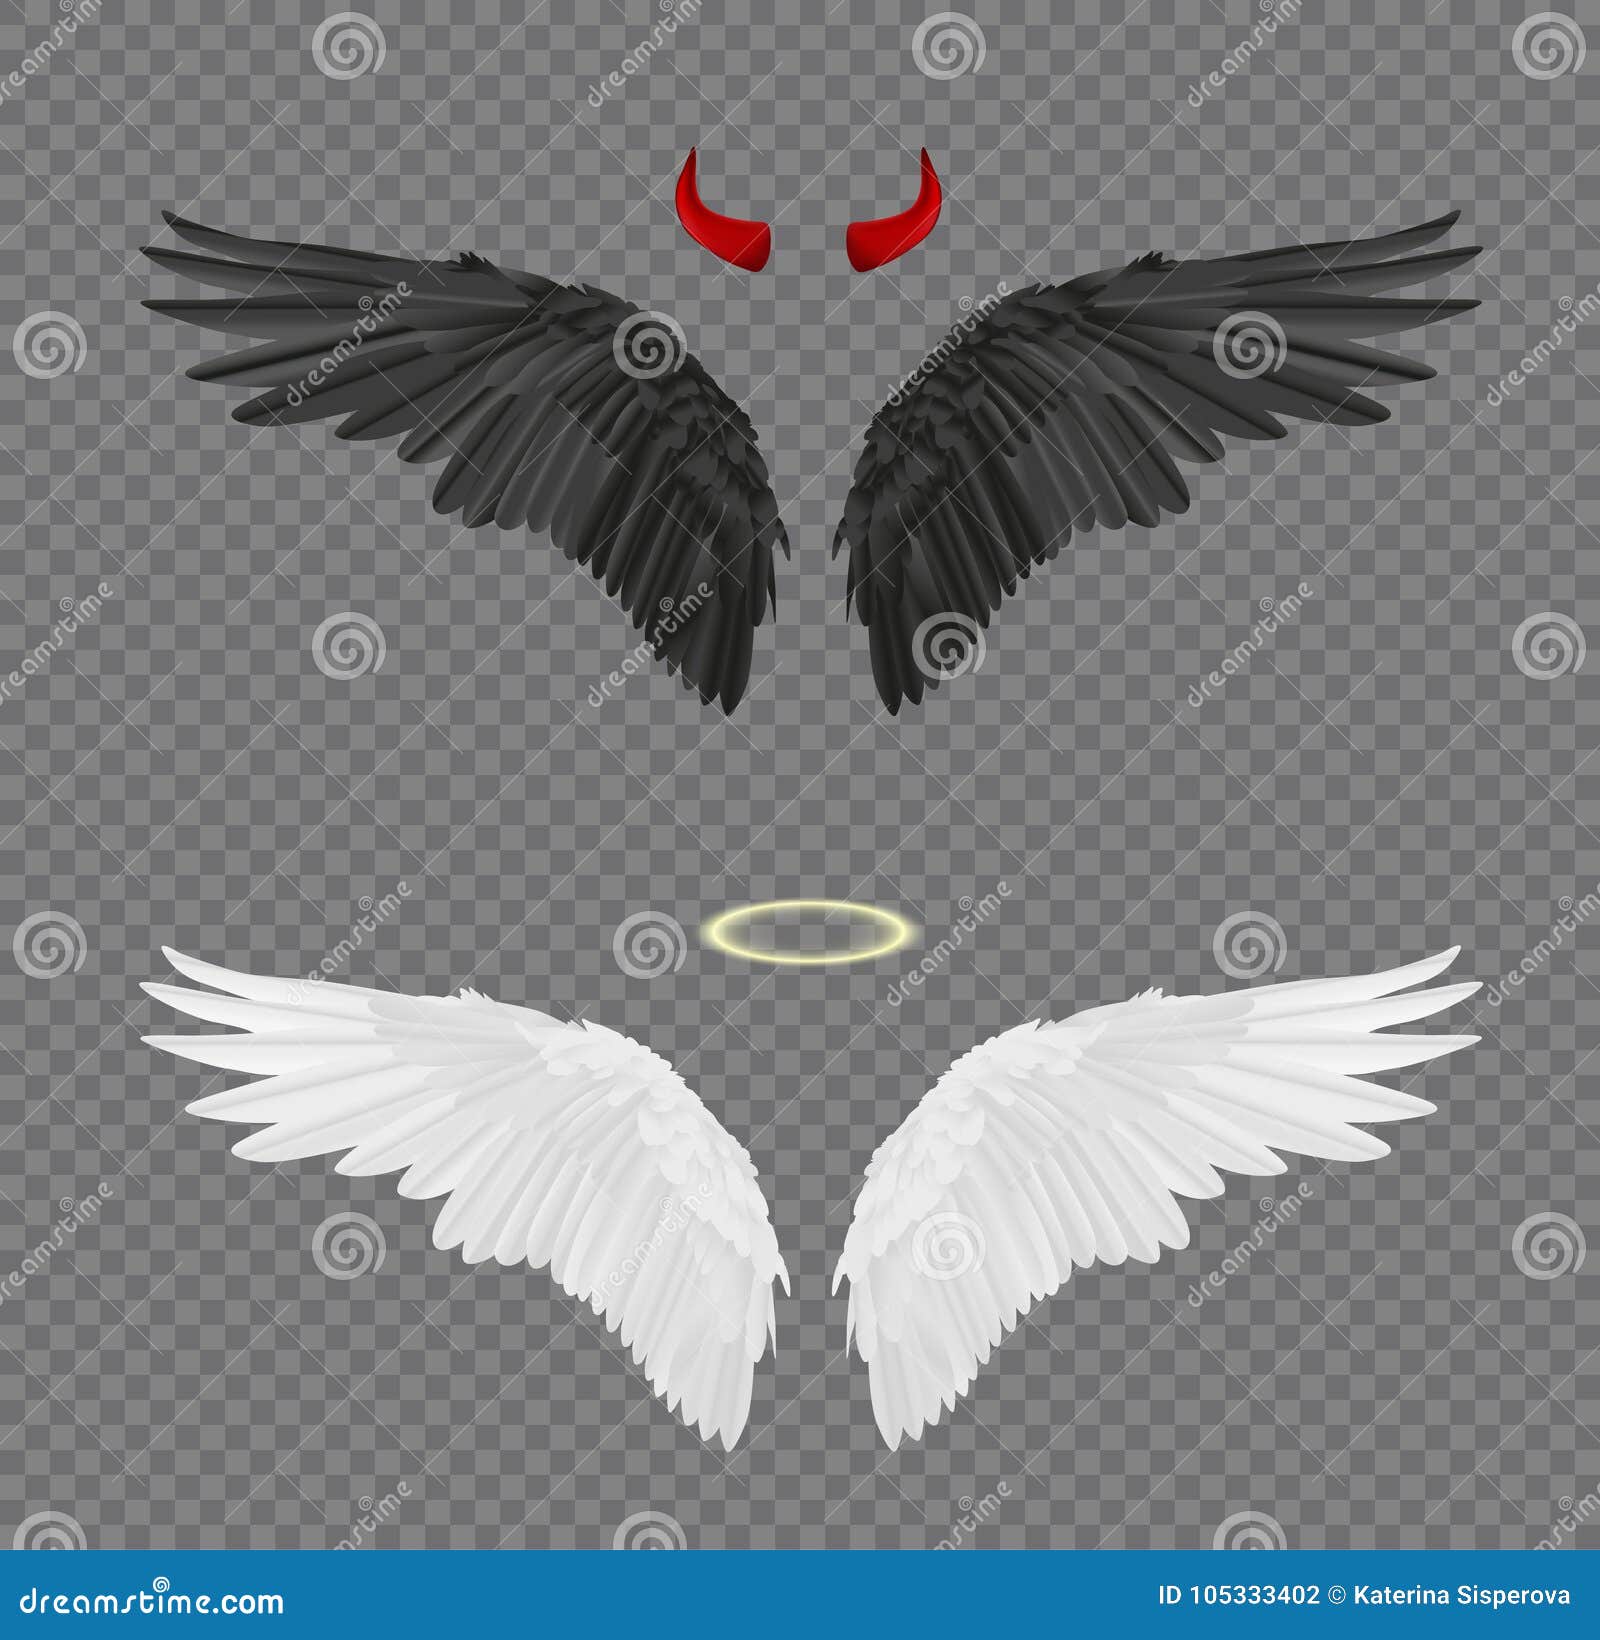 set of angel and devil realistic wings, horns and halo 